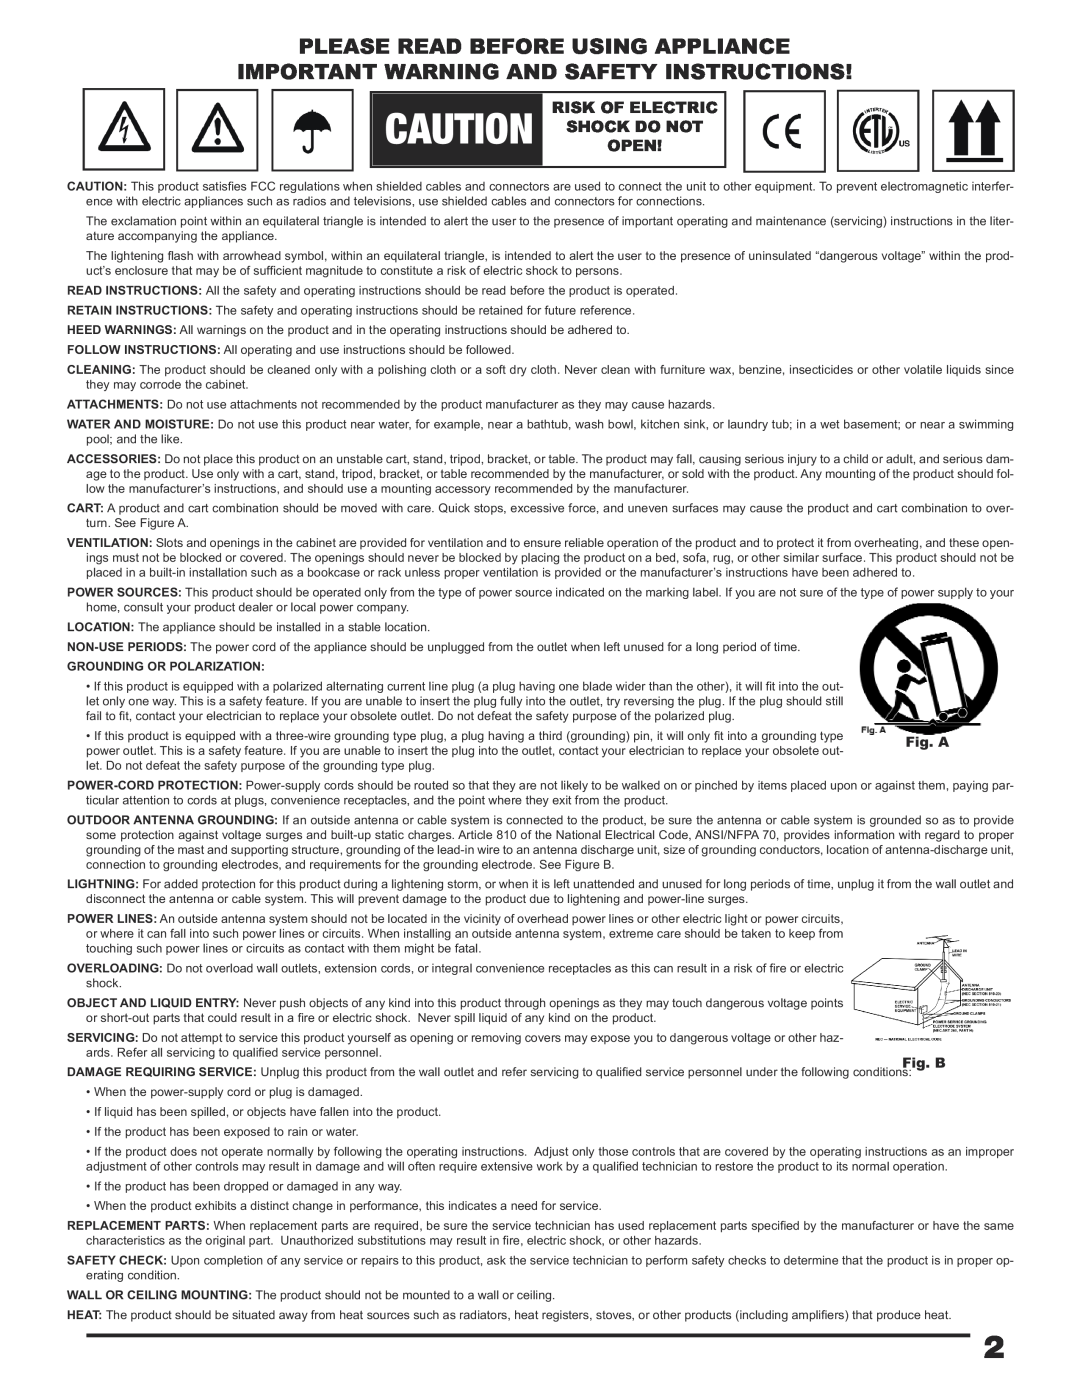 Gemini CDX-1250 manual Please Read Before Using Appliance, Important Warning And Safety Instructions, Fig. B, Fig. A 